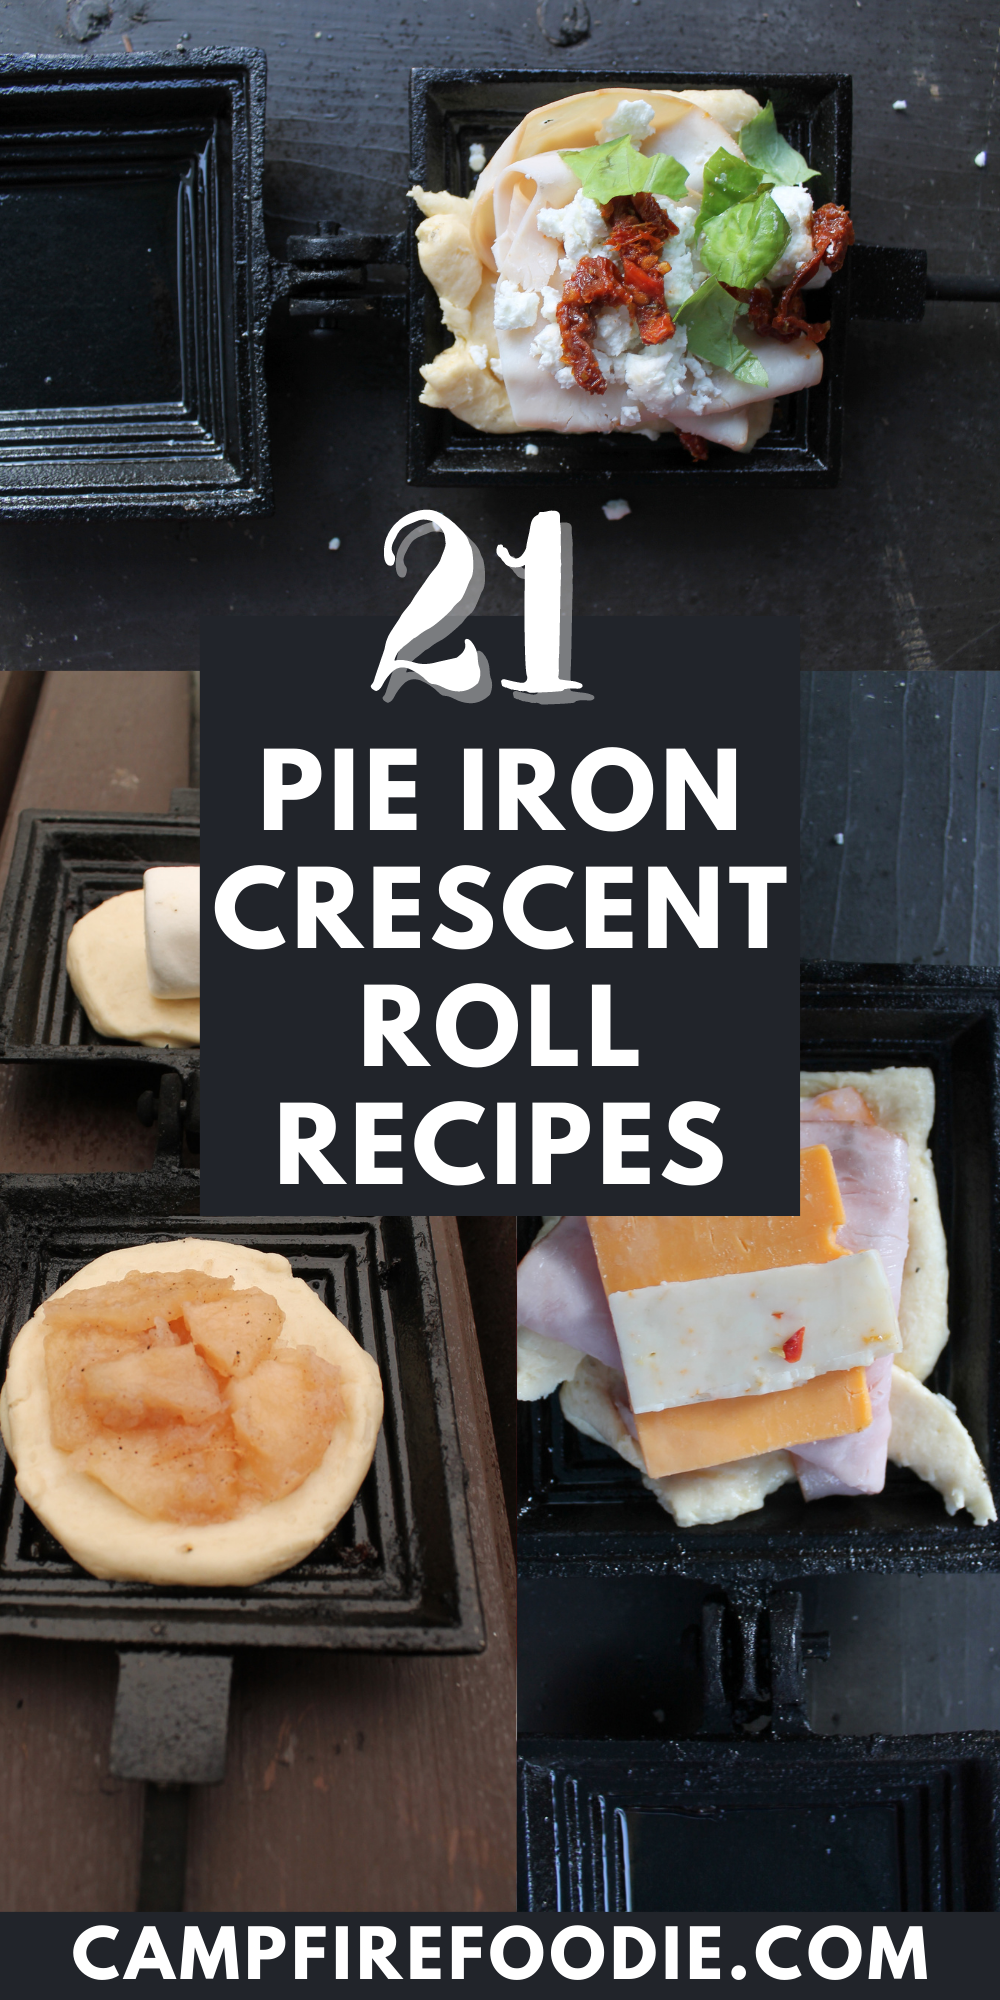 Pie Iron Crescent Roll Recipes » Campfire Foodie